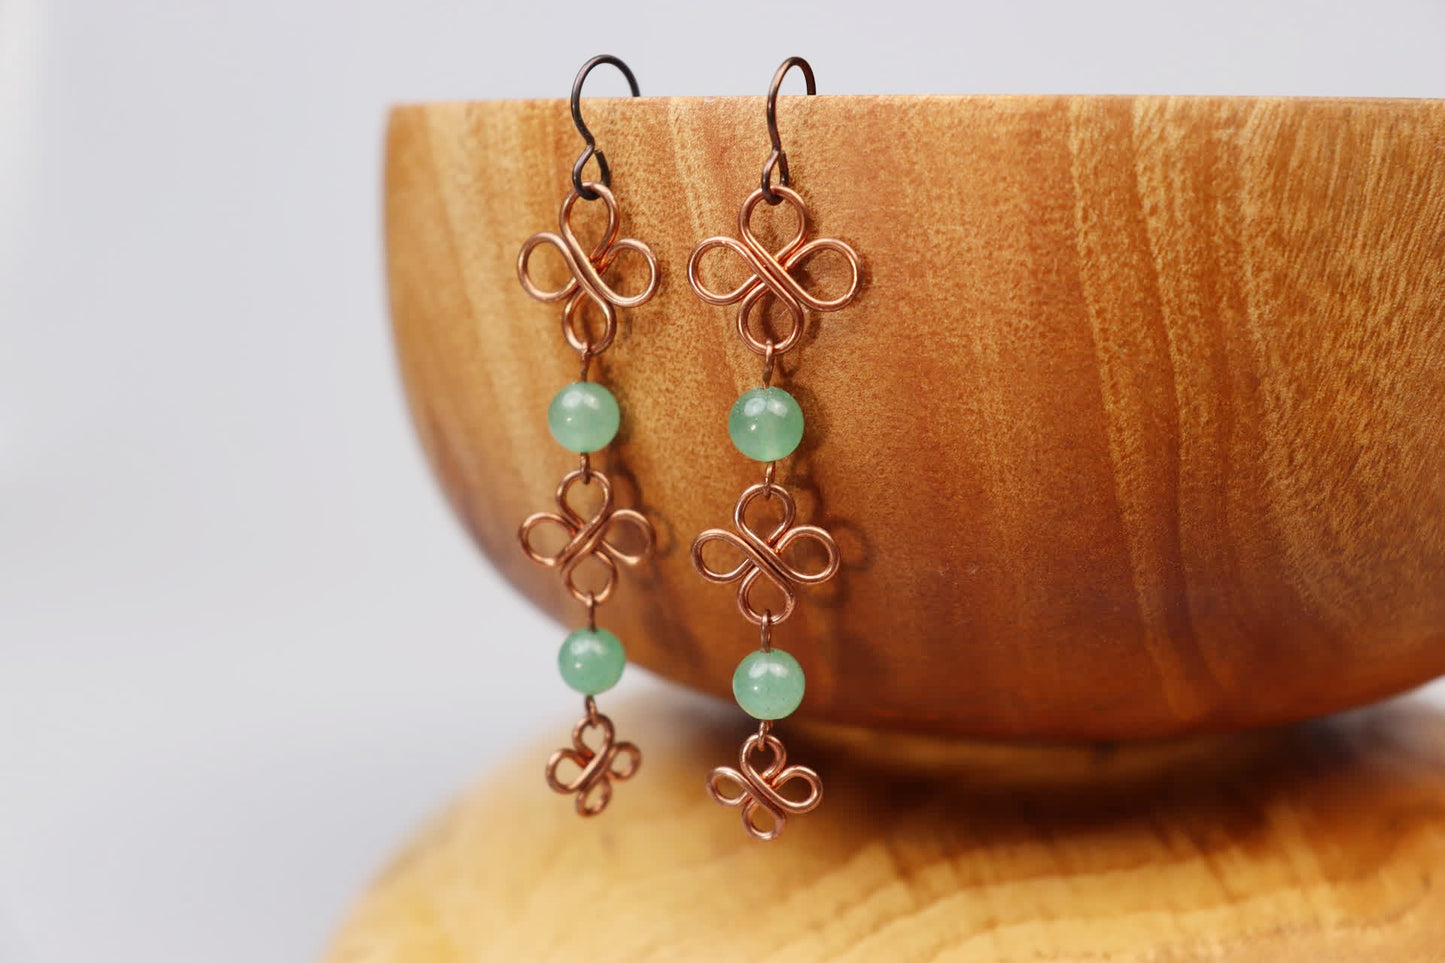 Three Tier Clover Drops in Copper and Jade Earrings